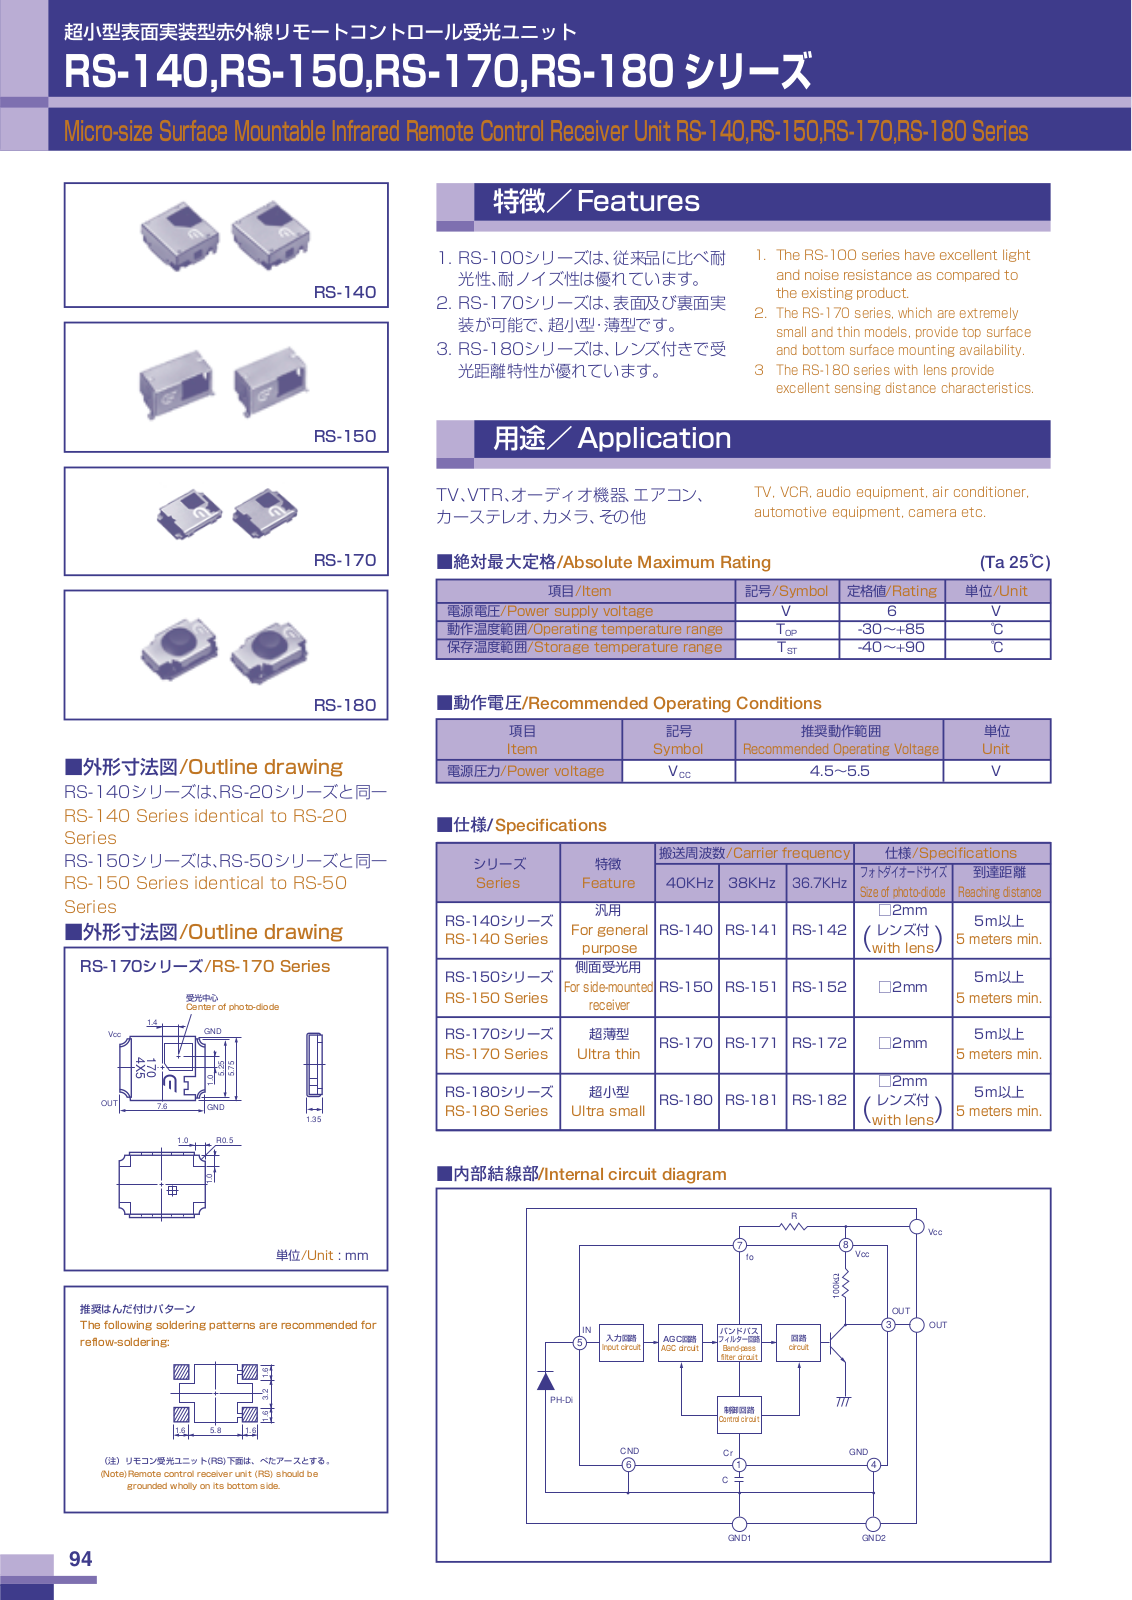 CITIZEN RS-140, RS-141, RS-142, RS-150, RS-151 Datasheet